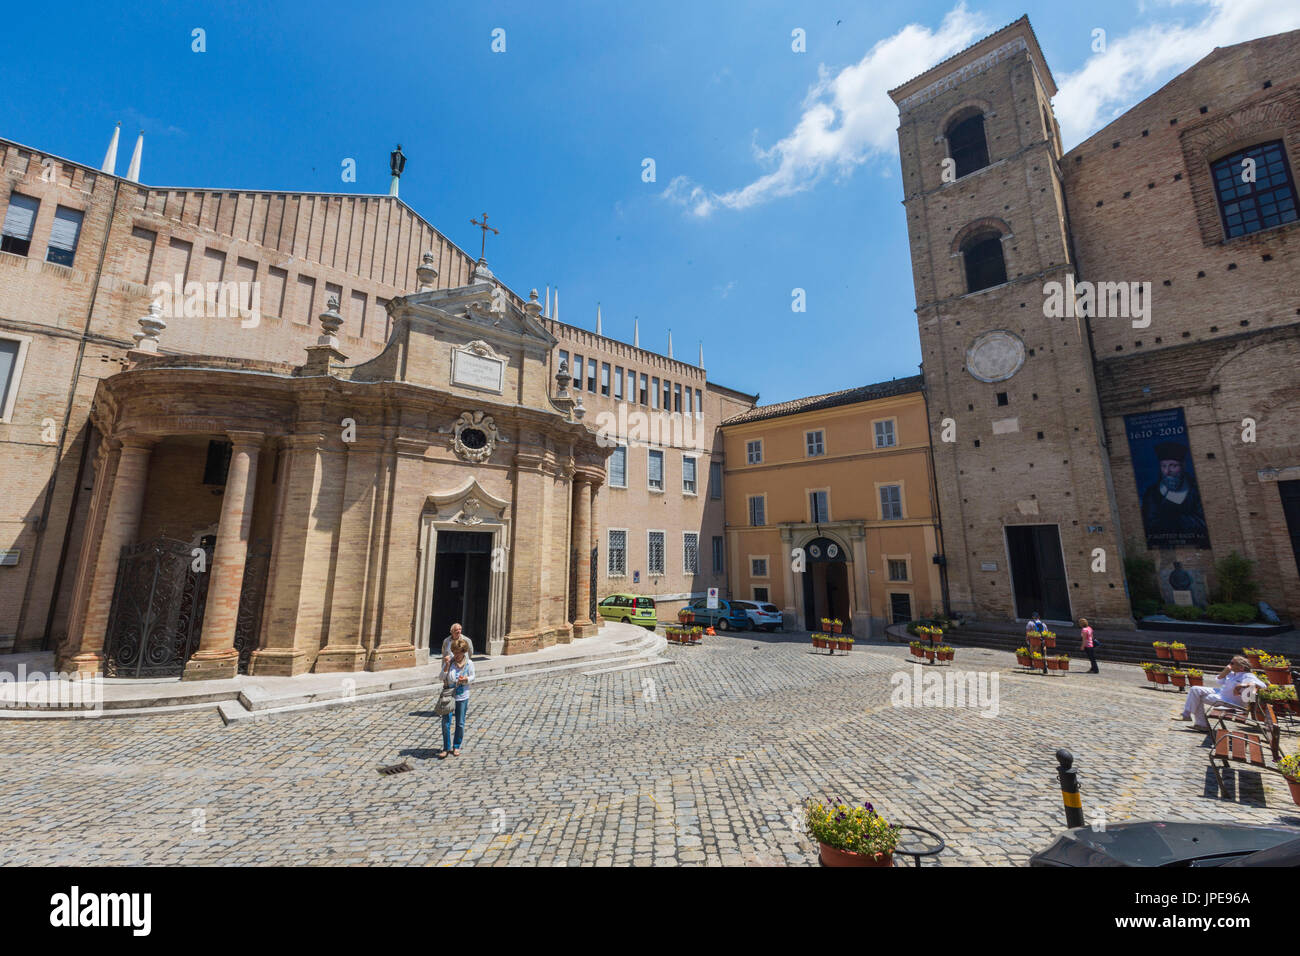 View of the ancient churches and historical buildings of the medieval town center Macerata Marche Italy Europe Stock Photo